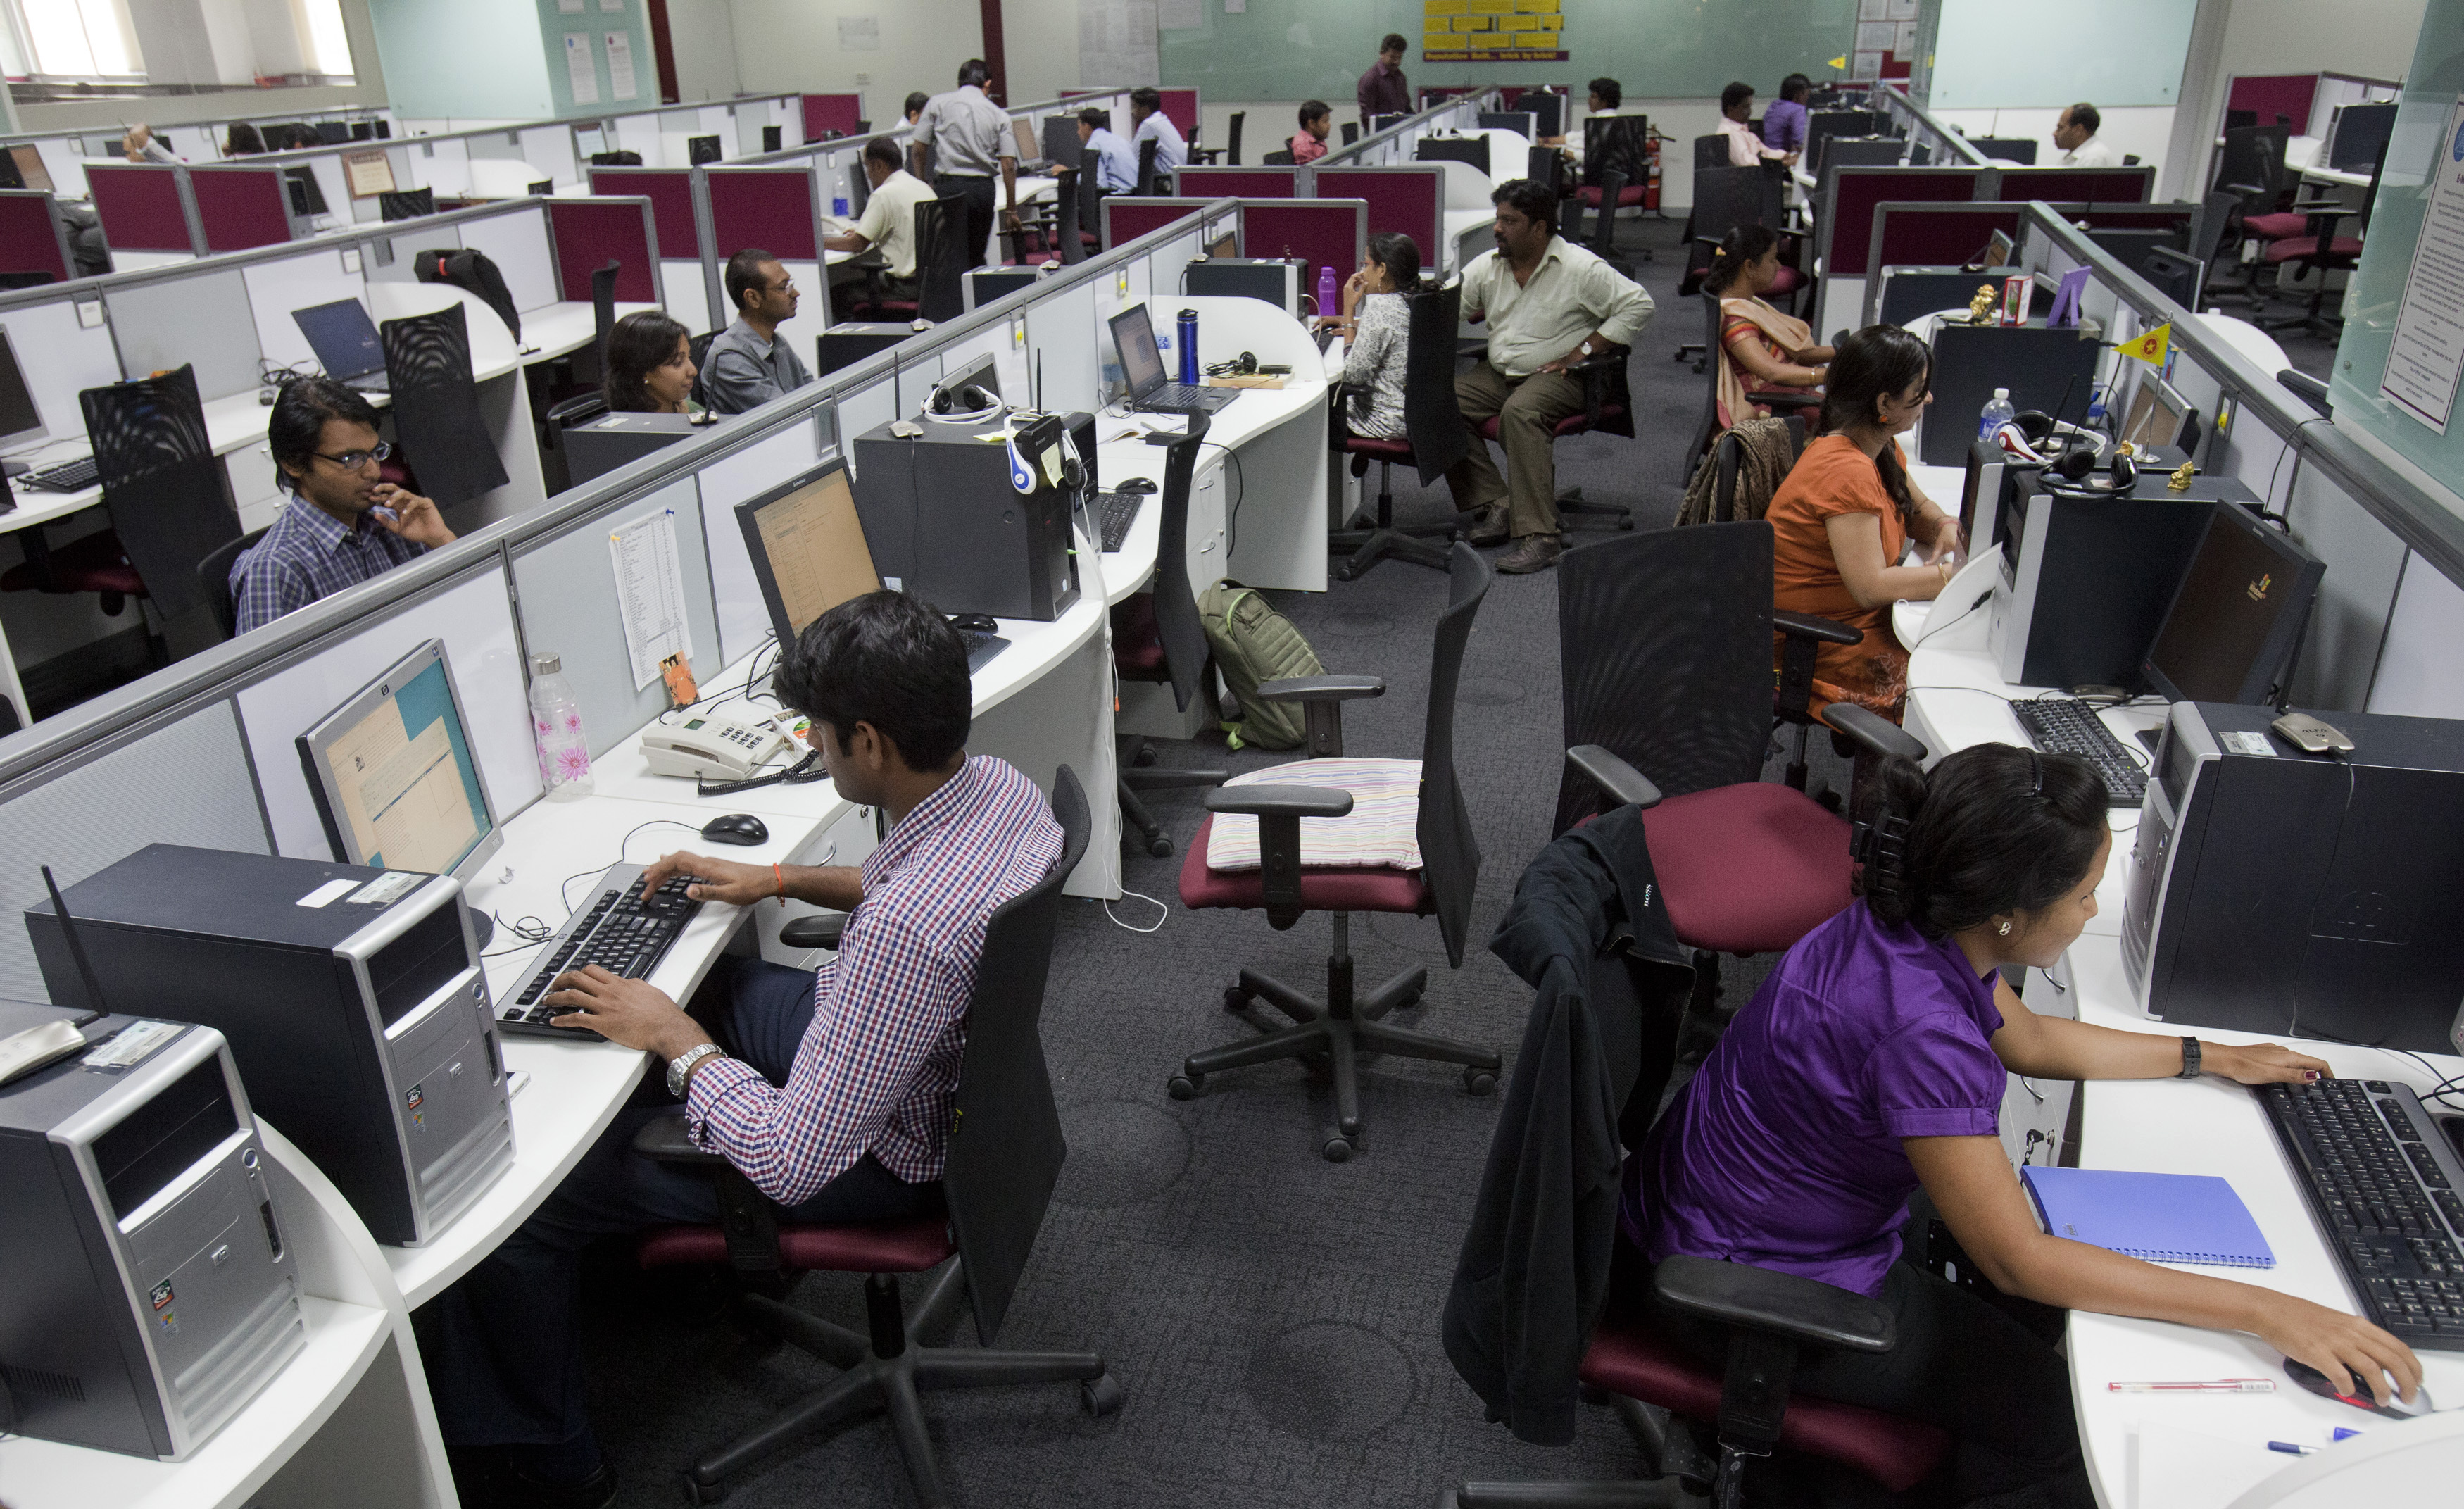 Workers are seen at their workstations on the floor of an outsourcing centre in Bangalore, February 29, 2012. India's IT industry, with Bangalore firms forming the largest component, is now worth an annual $100 billion and growing 14 percent per year, one of the few bright spots in an economy blighted by policy stagnation and political instability. Picture taken on February 29, 2012. To match Insight INDIA-OUTSOURCING/   REUTERS/Vivek Prakash (INDIA - Tags: BUSINESS EMPLOYMENT SCIENCE TECHNOLOGY) - GM1E8450SWY01